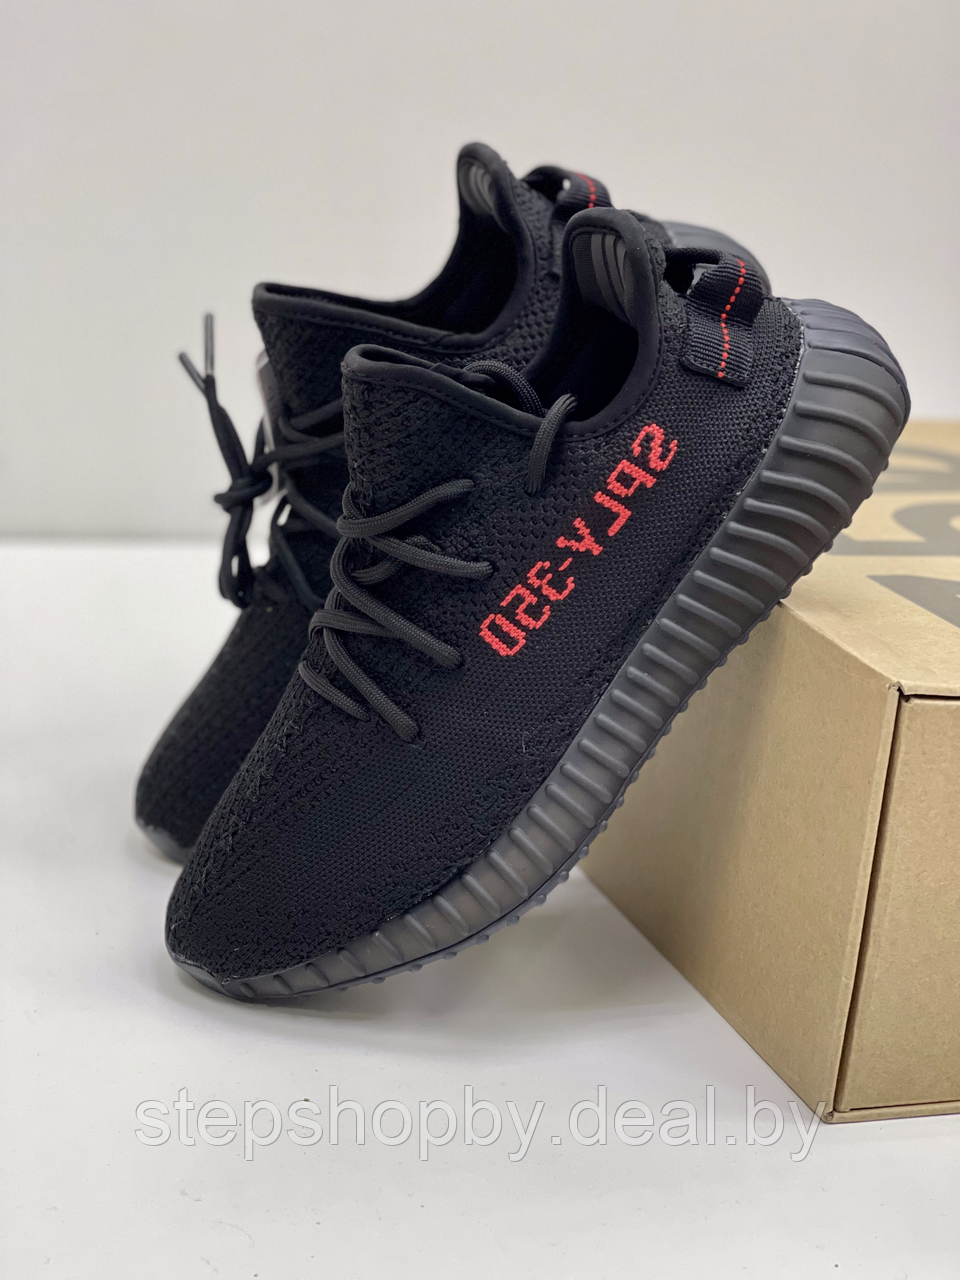 Adidas Yeezy Boost 350 V2 Core Black Red 'Bred' размер 43 - фото 2 - id-p177723567